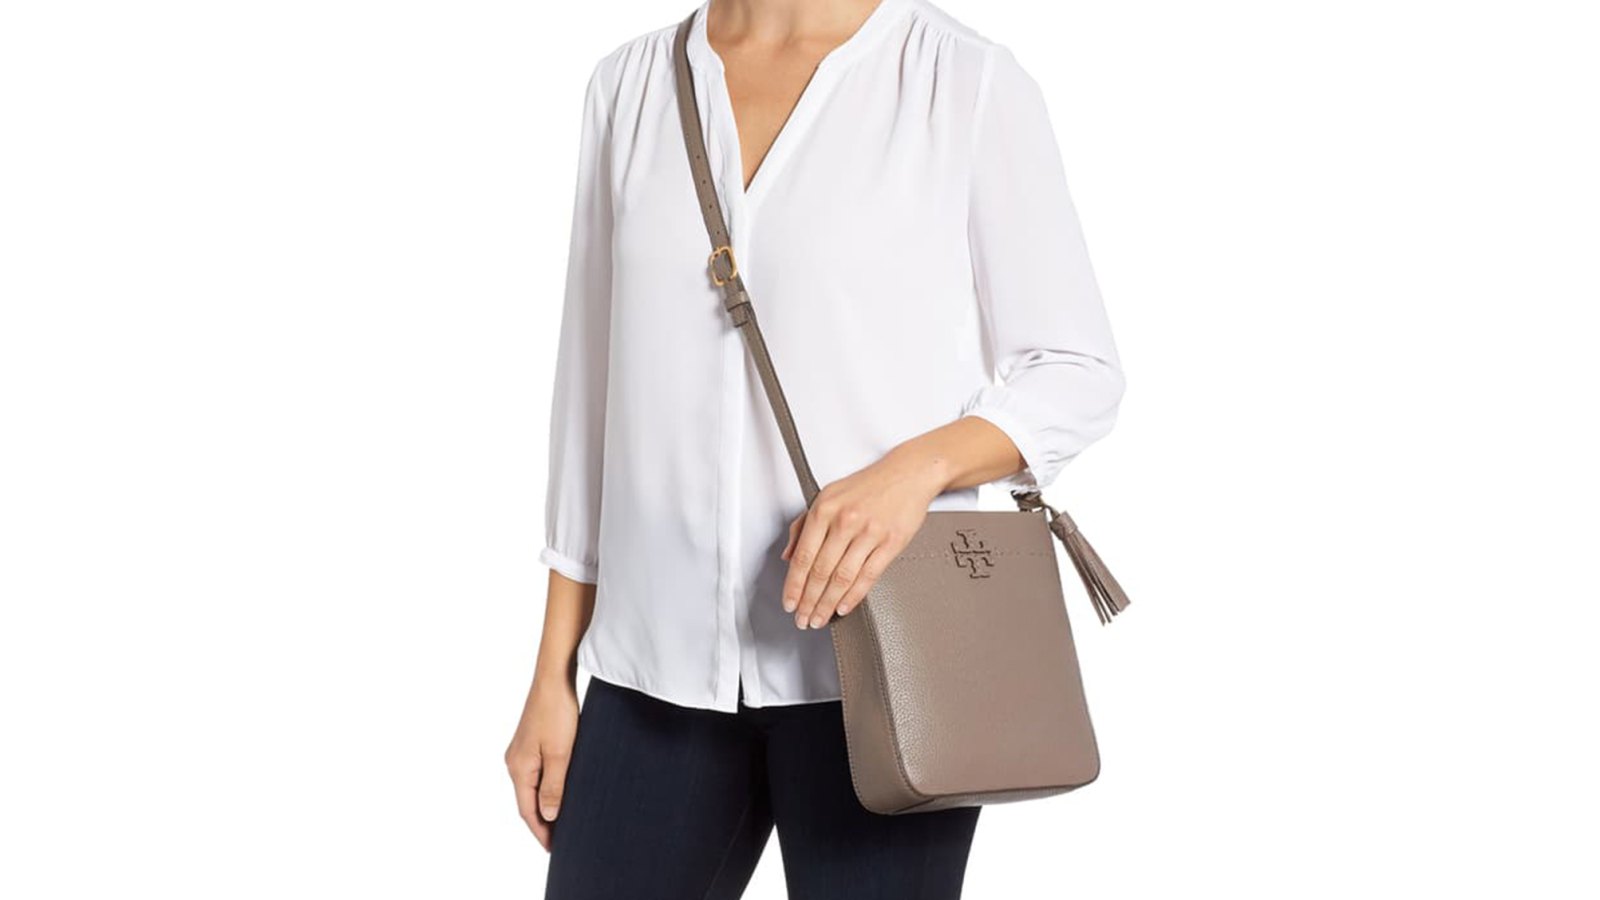 Shoppers Love How Spacious This Tory Burch Crossbody Is